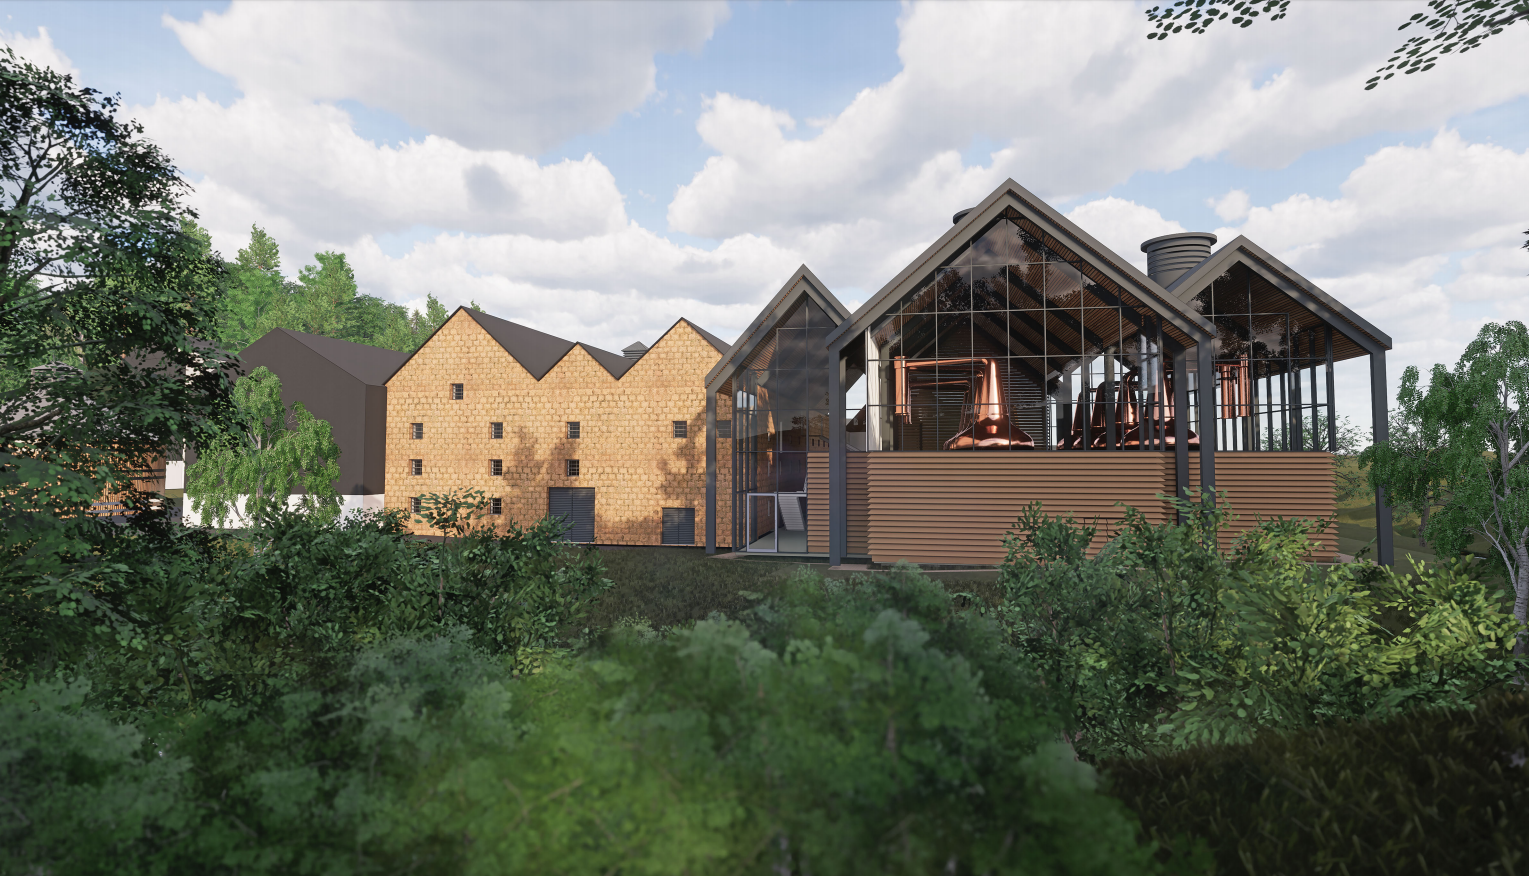 Artist impression of the Aberlour Distillery project.